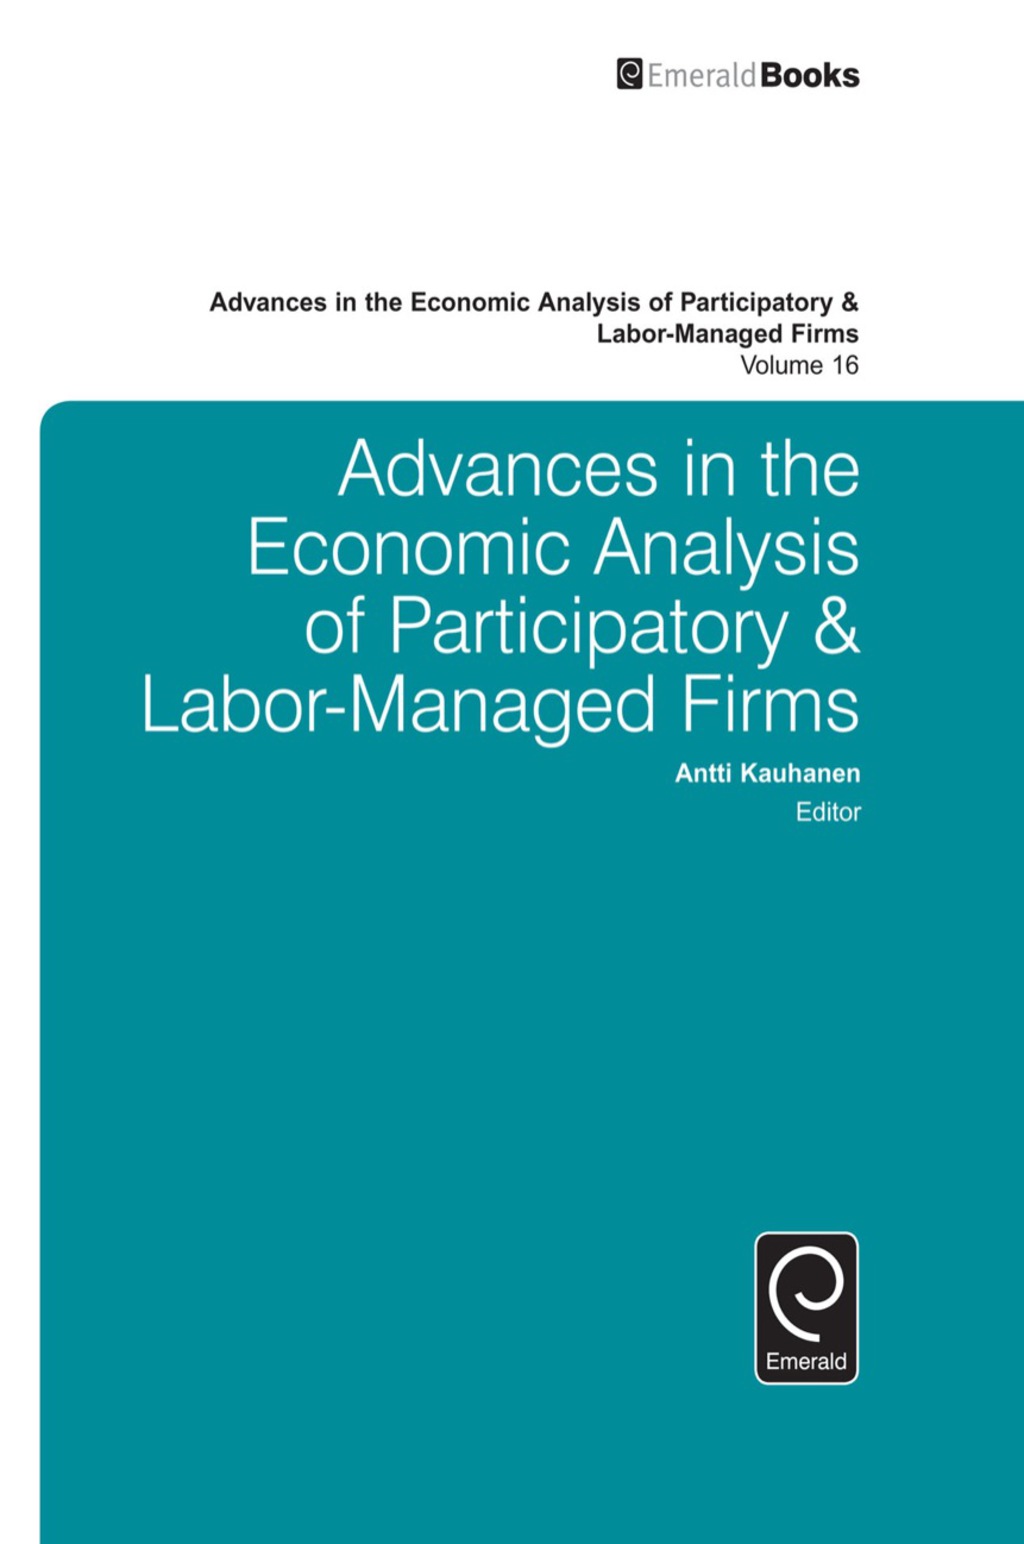 Advances in the Economic Analysis of Participatory & Labor-Managed Firms (eBook) - Antti Kauhanen